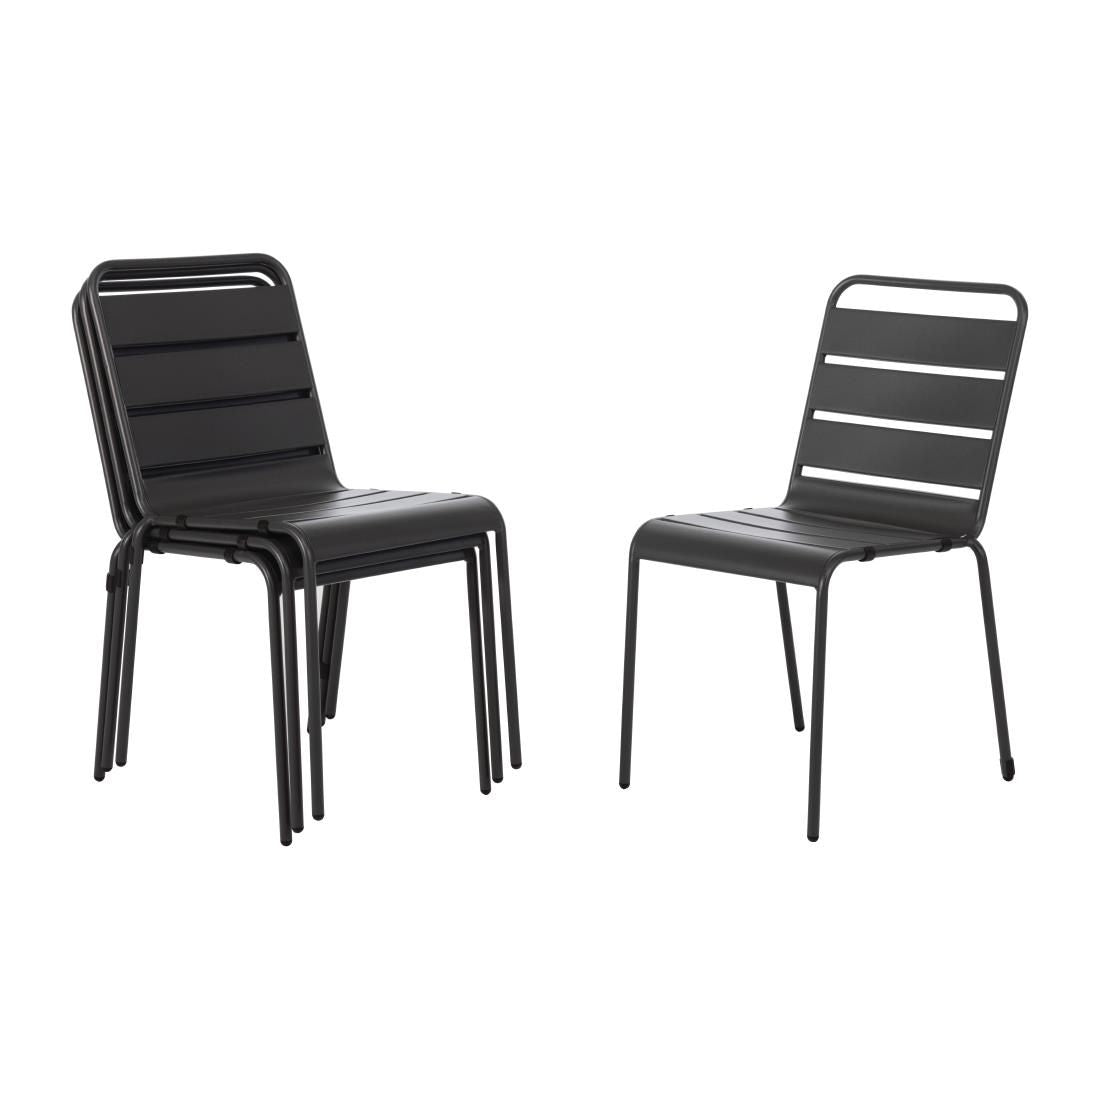 Bolero Slatted Steel Side Chairs Grey (Pack of 4) JD Catering Equipment Solutions Ltd